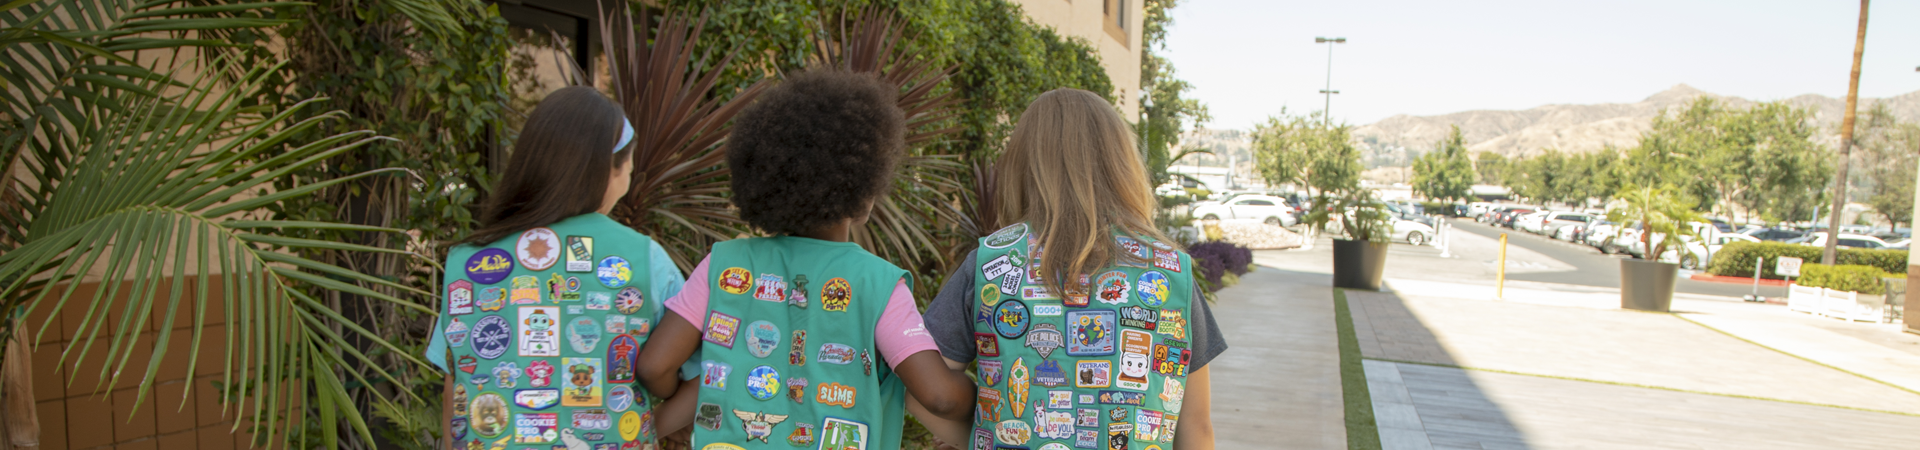  A group of Junior Girl Scouts with fun patches on back of uniforms walking together 